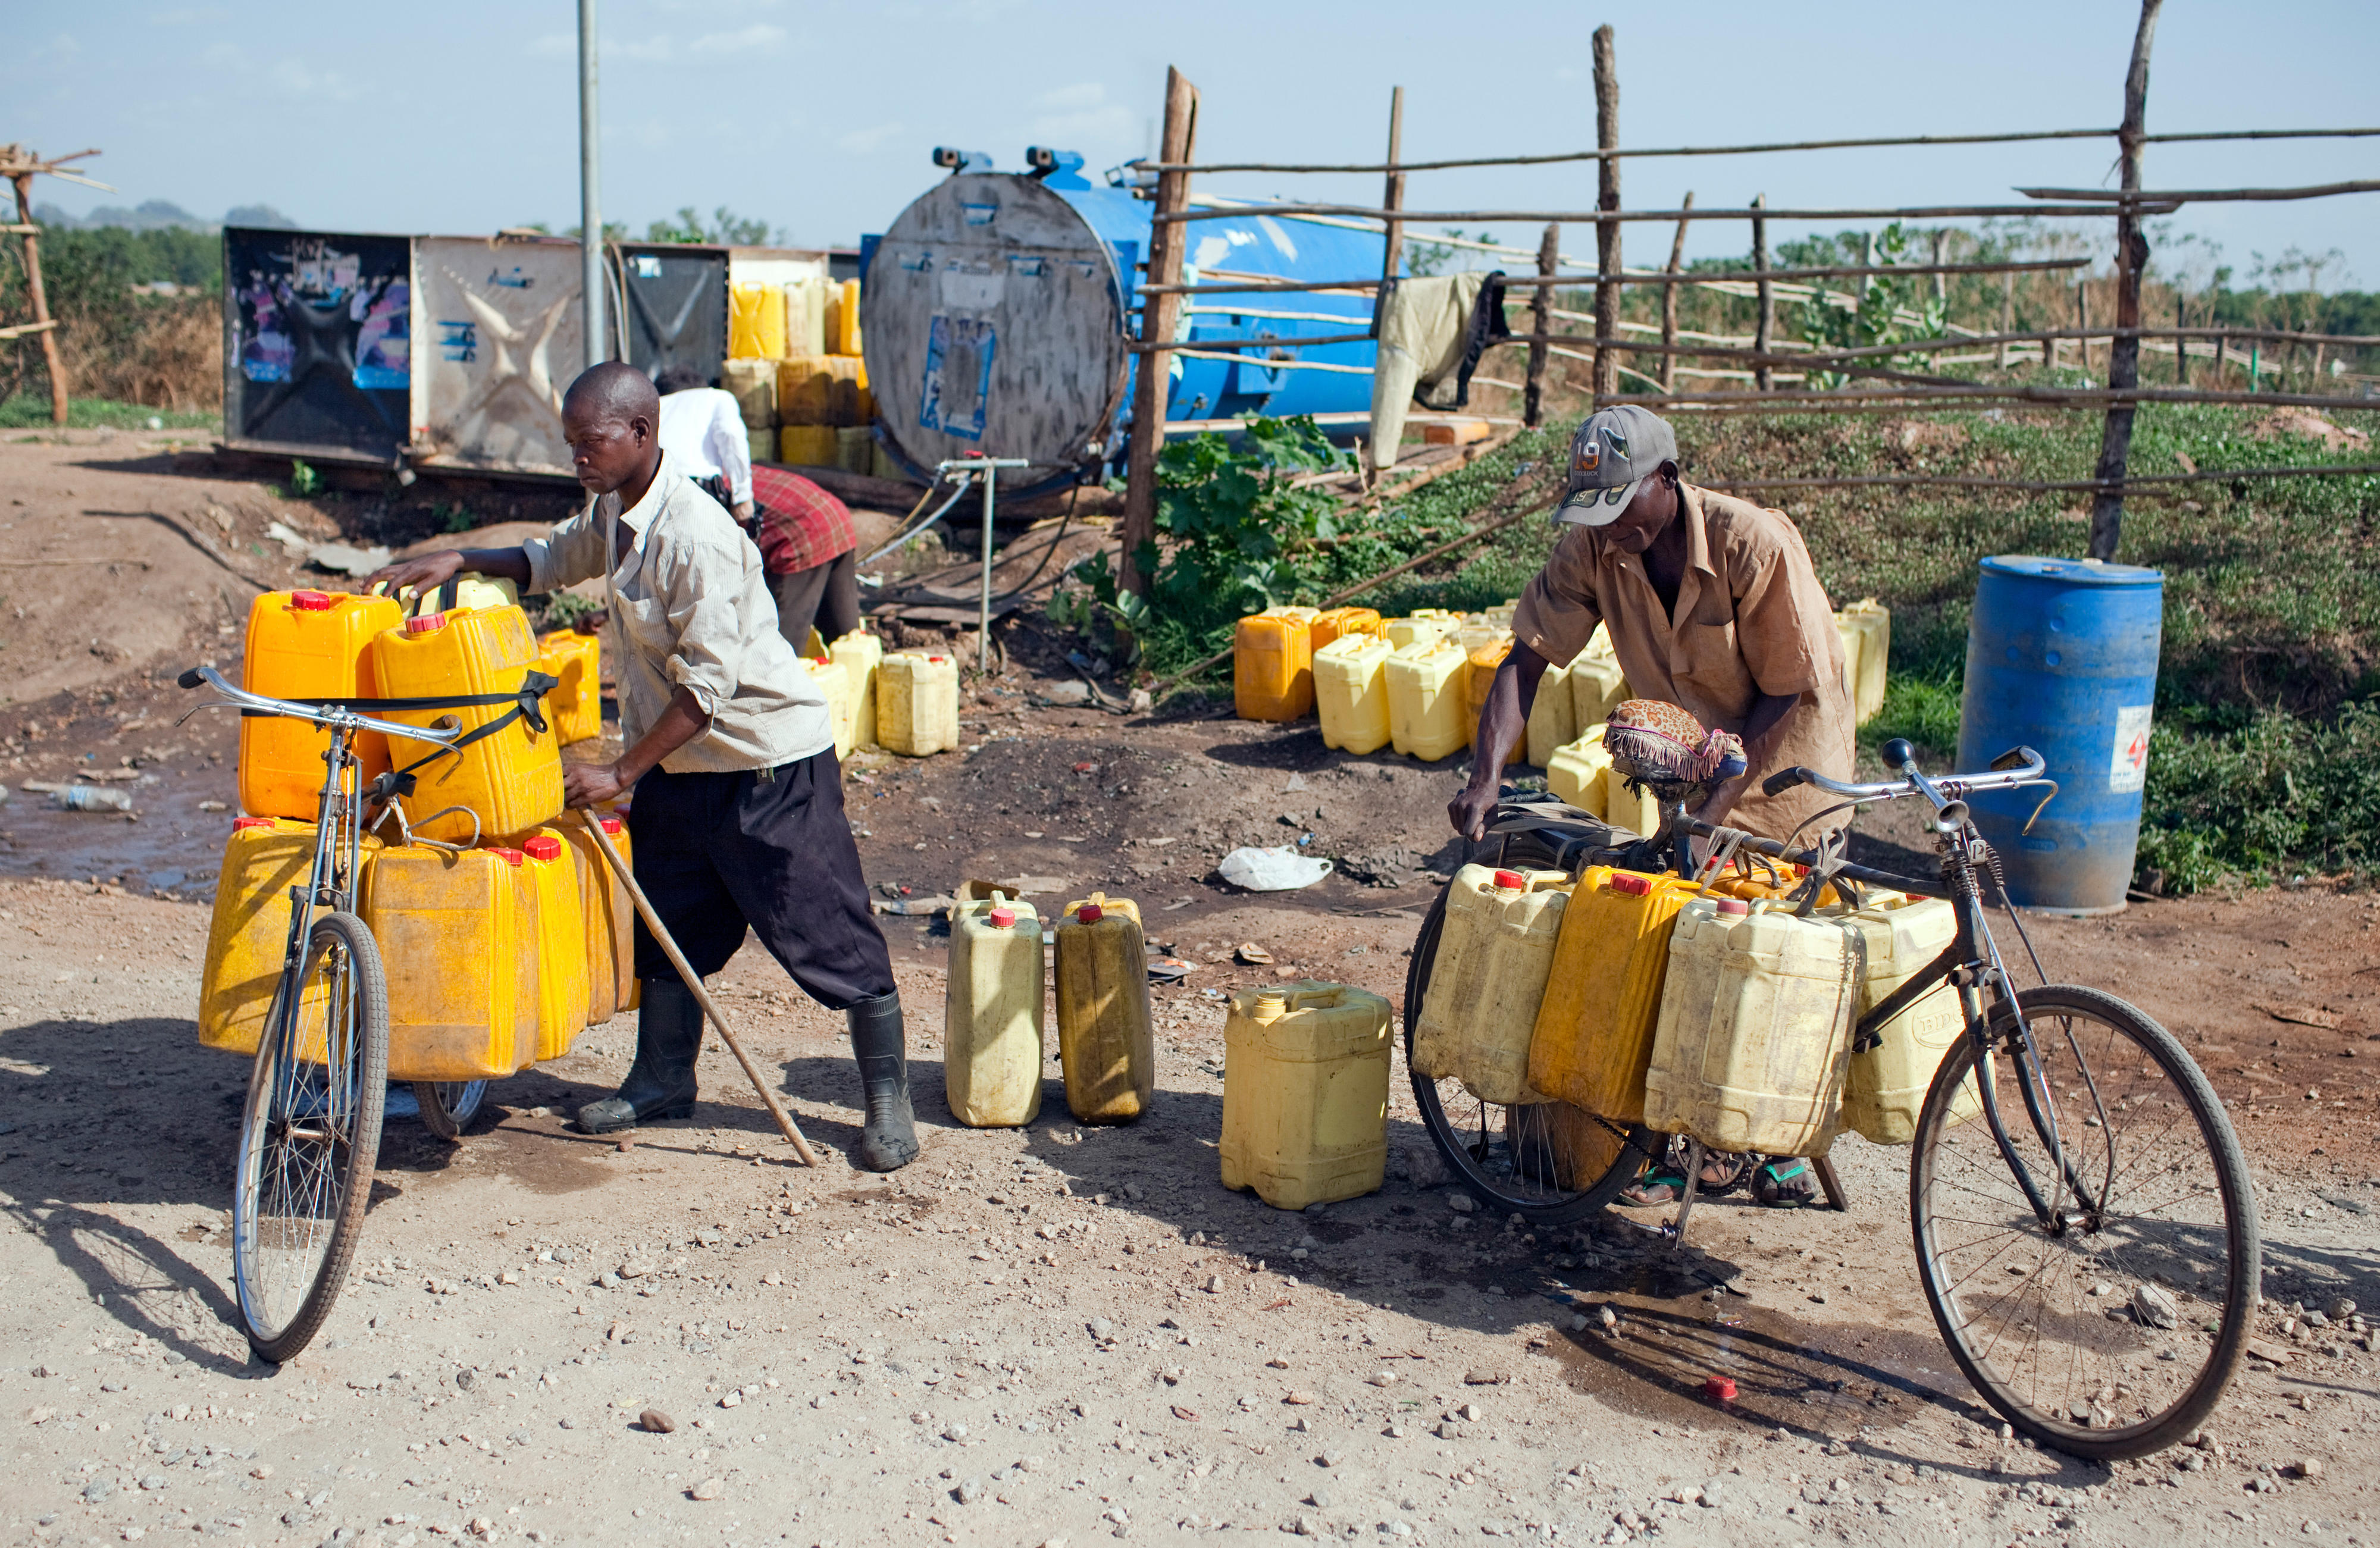 Two men fetch water from a public well with a bicycle.